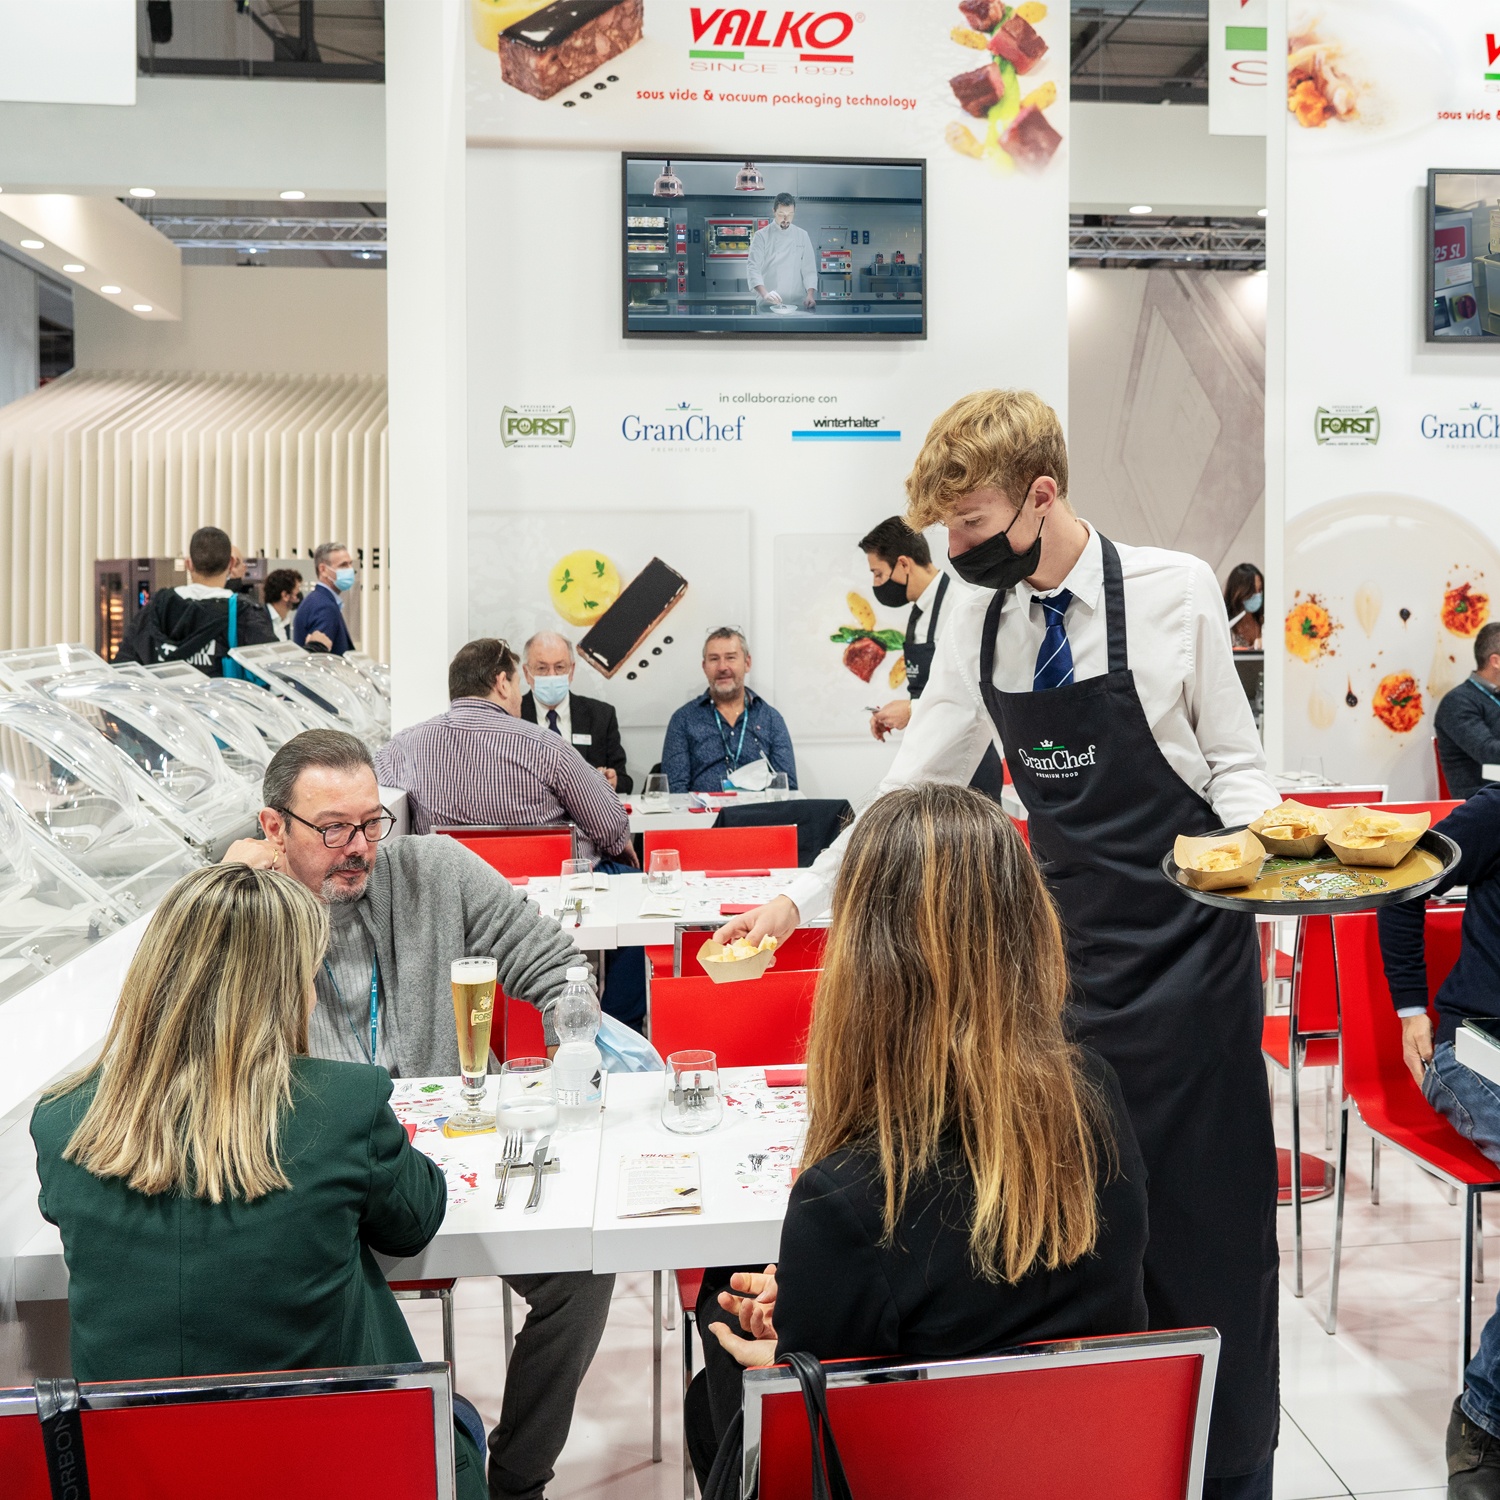 HOST 2021: WE'RE CERTAINLY OFF TO A GREAT, FRESH START!